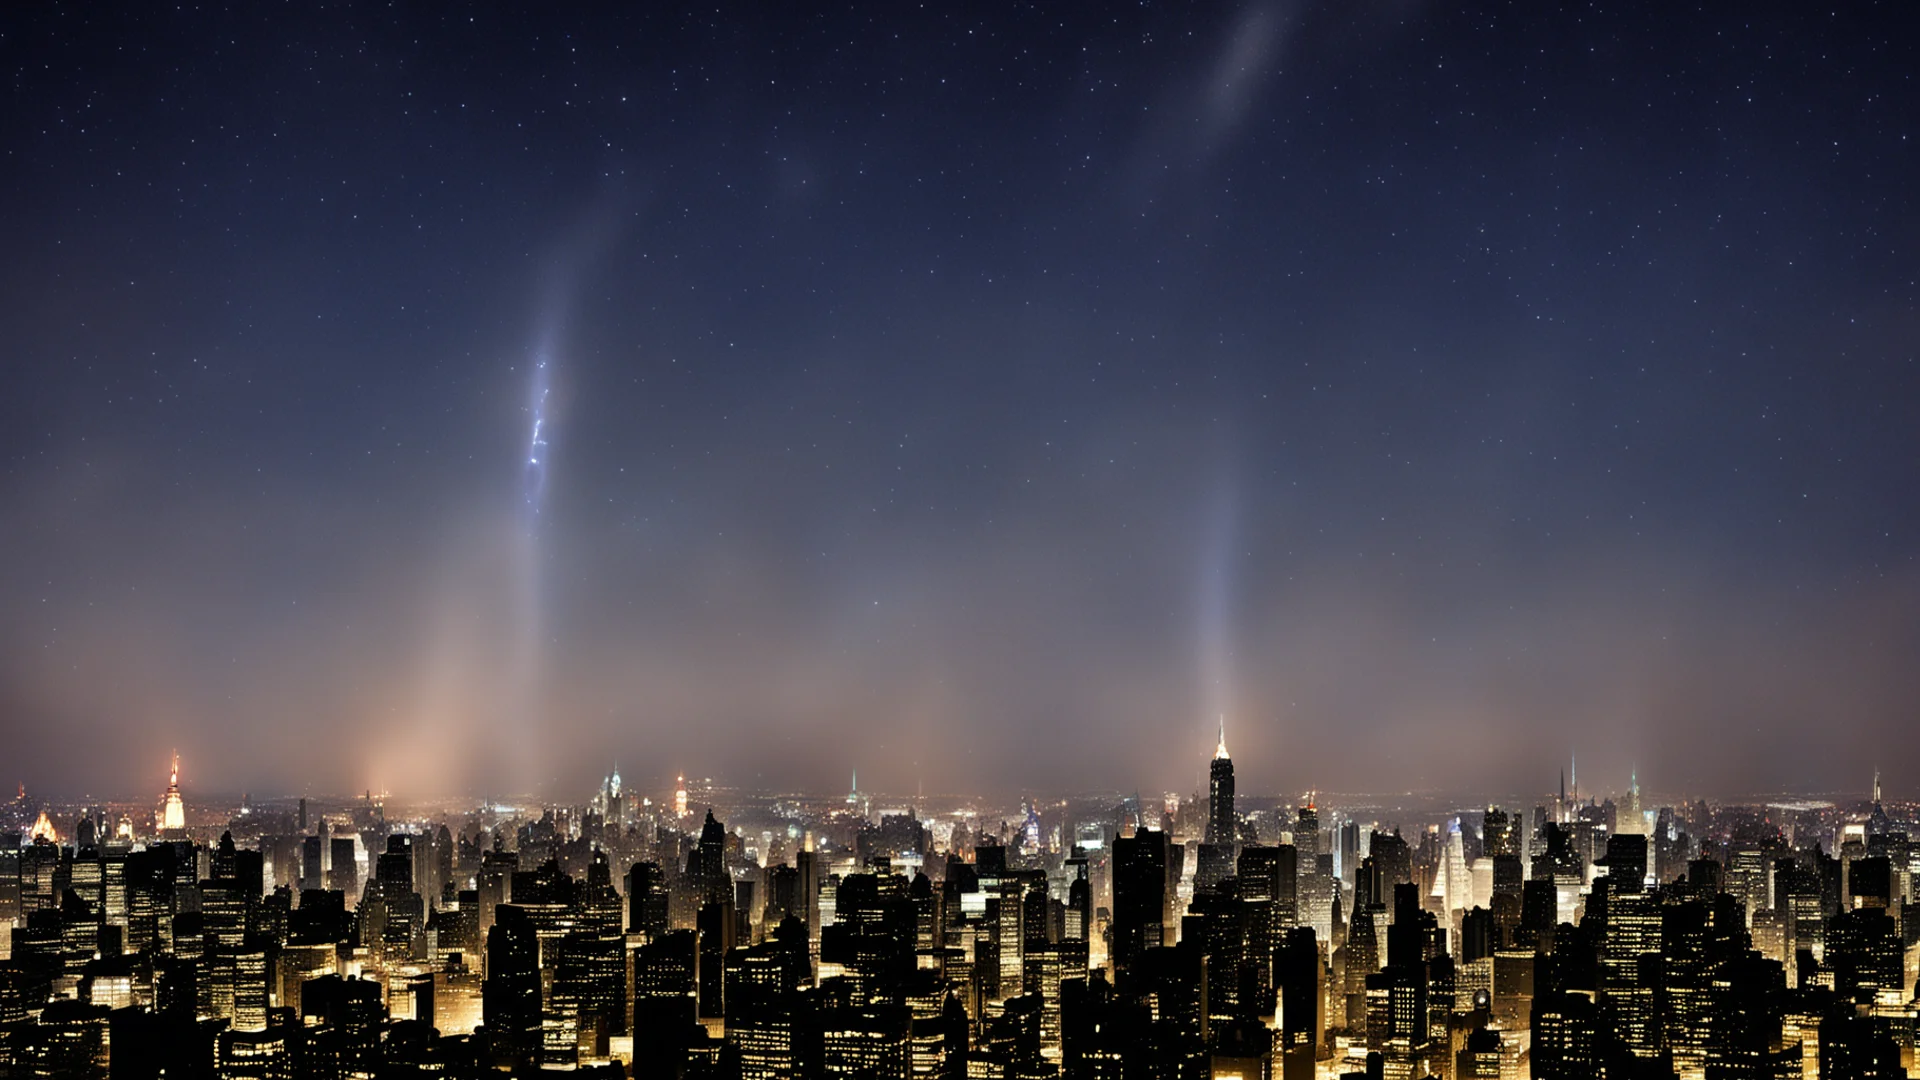 comet crashing into new york at night amazing awesome portrait 2 wide